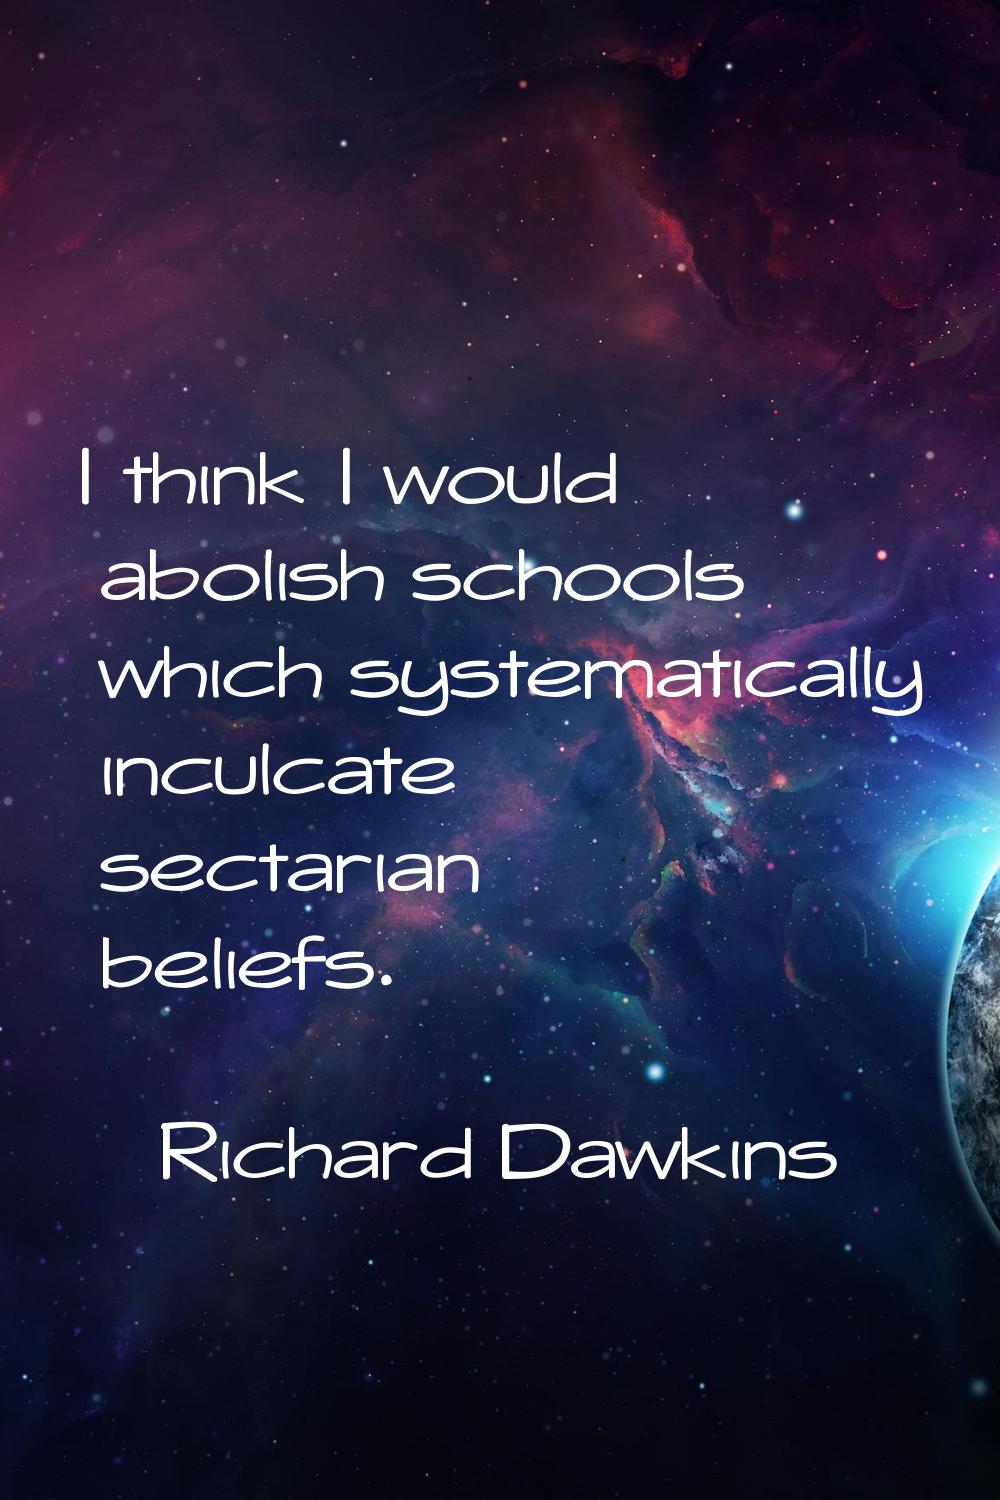 I think I would abolish schools which systematically inculcate sectarian beliefs.